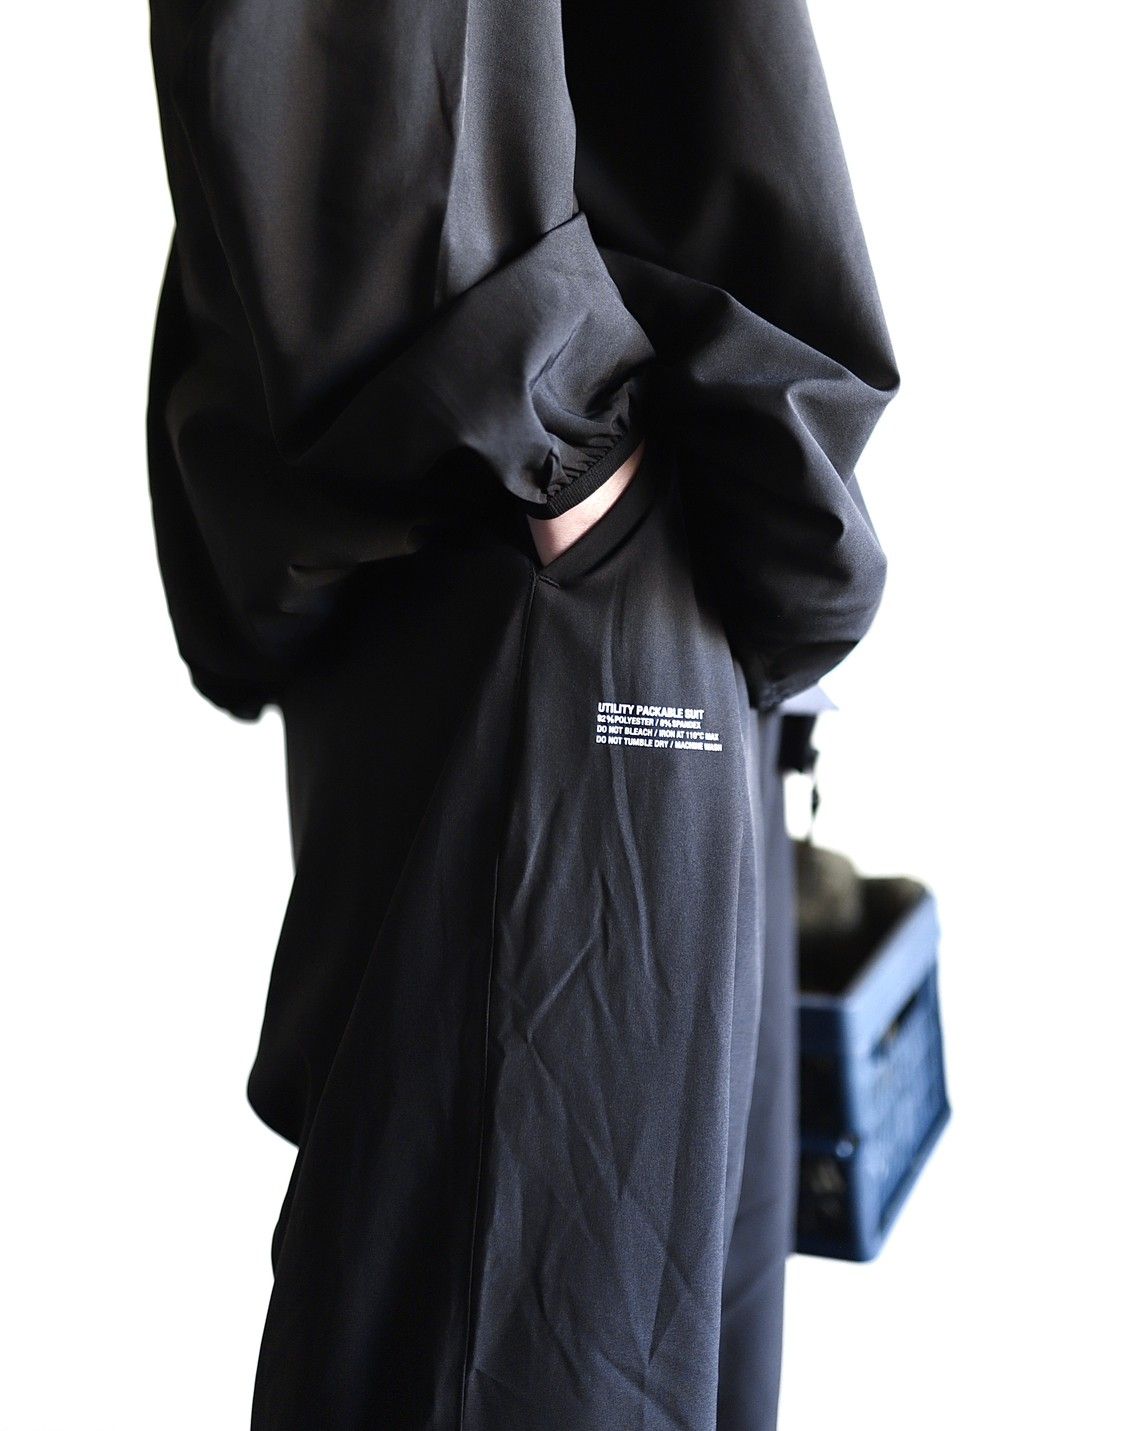 FreshService - ReFresh!Service. 24SS “UTILITY PACKABLE SUIT ...